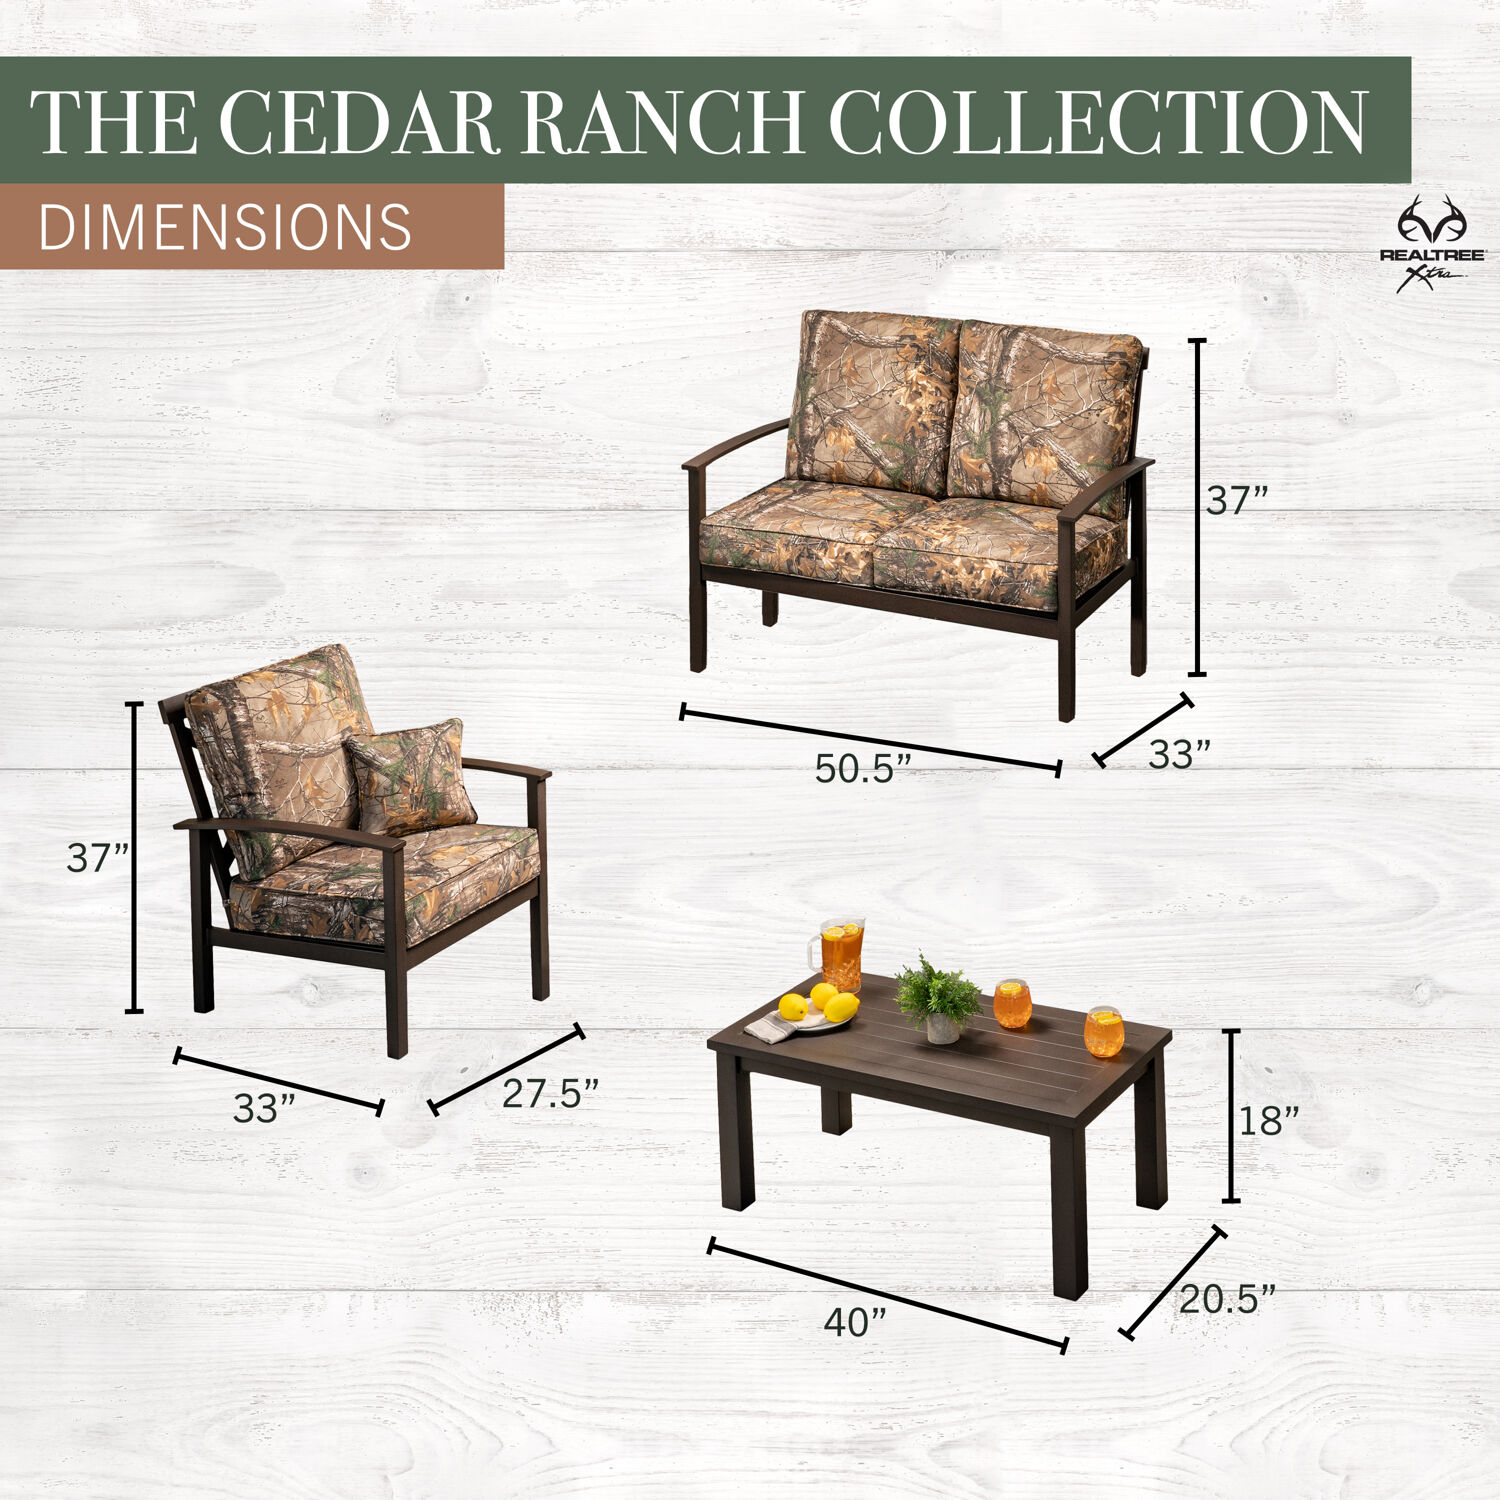 Hanover Cedar Ranch 4-Piece Outdoor Patio Furniture Set, 2 Deep Seating Chairs, Loveseat, and Coffee Table, Thick RealTree Printed Camo Cushions, CDRN - image 4 of 10